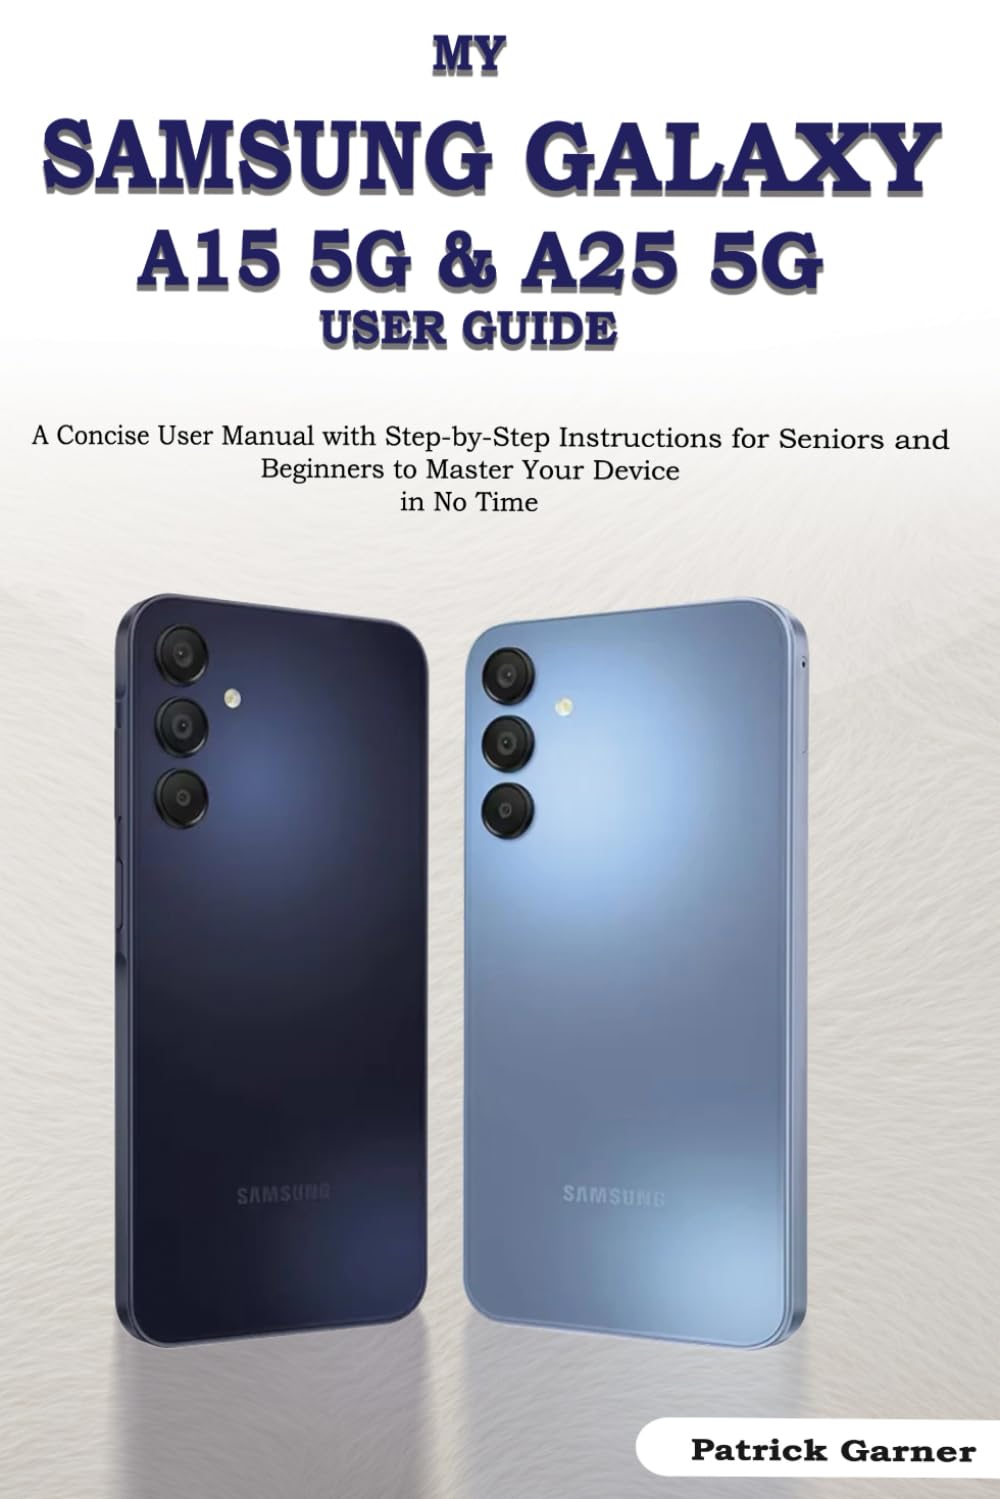 My Samsung Galaxy A15 5G & A25 5G User Guide: A Concise User Manual with Step-by-Step Instructions for Seniors and Beginners to Master Your Device in No Time